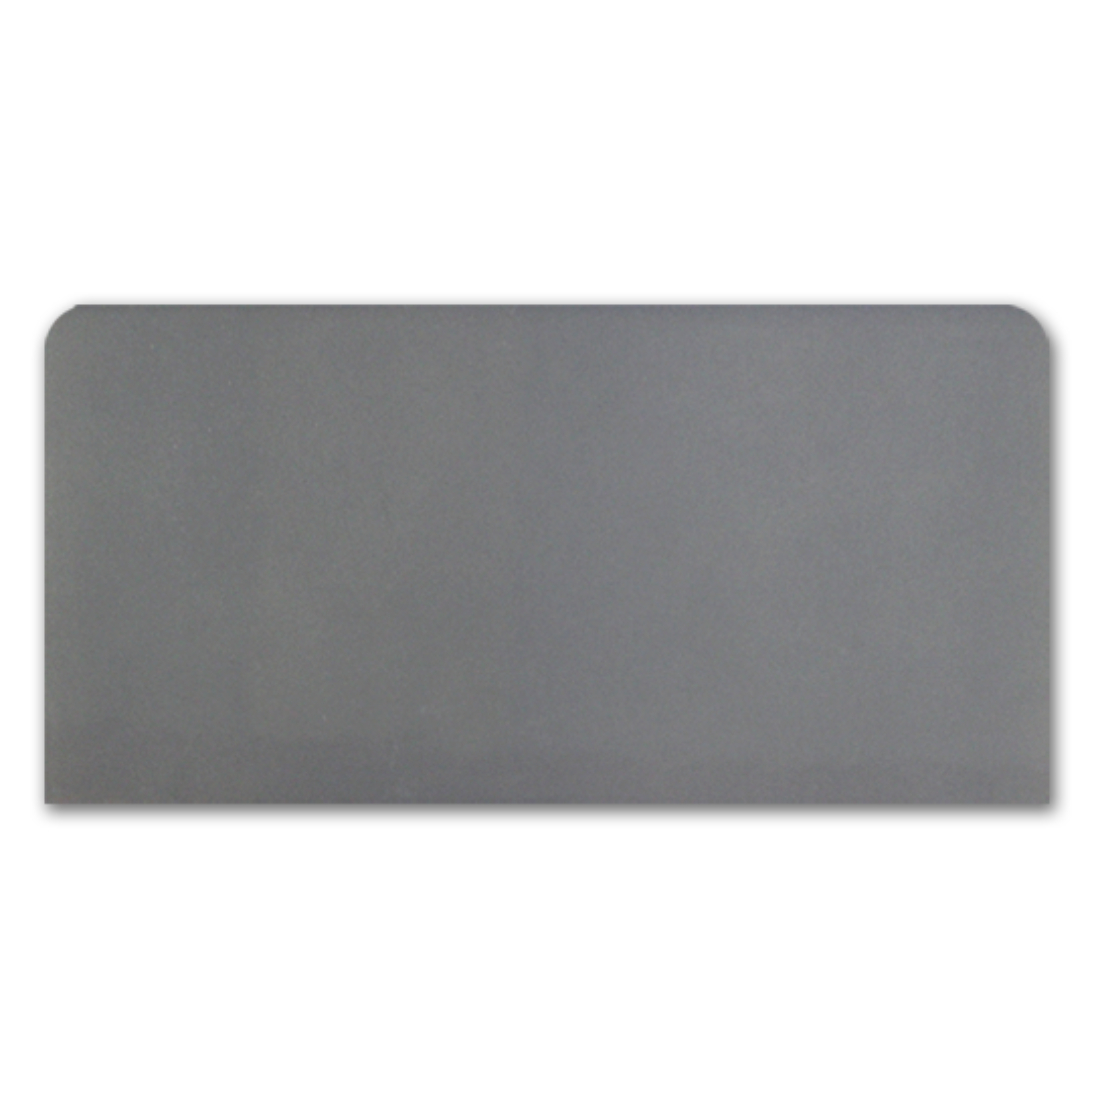 Imperial Pewter Gls 10x20 RES